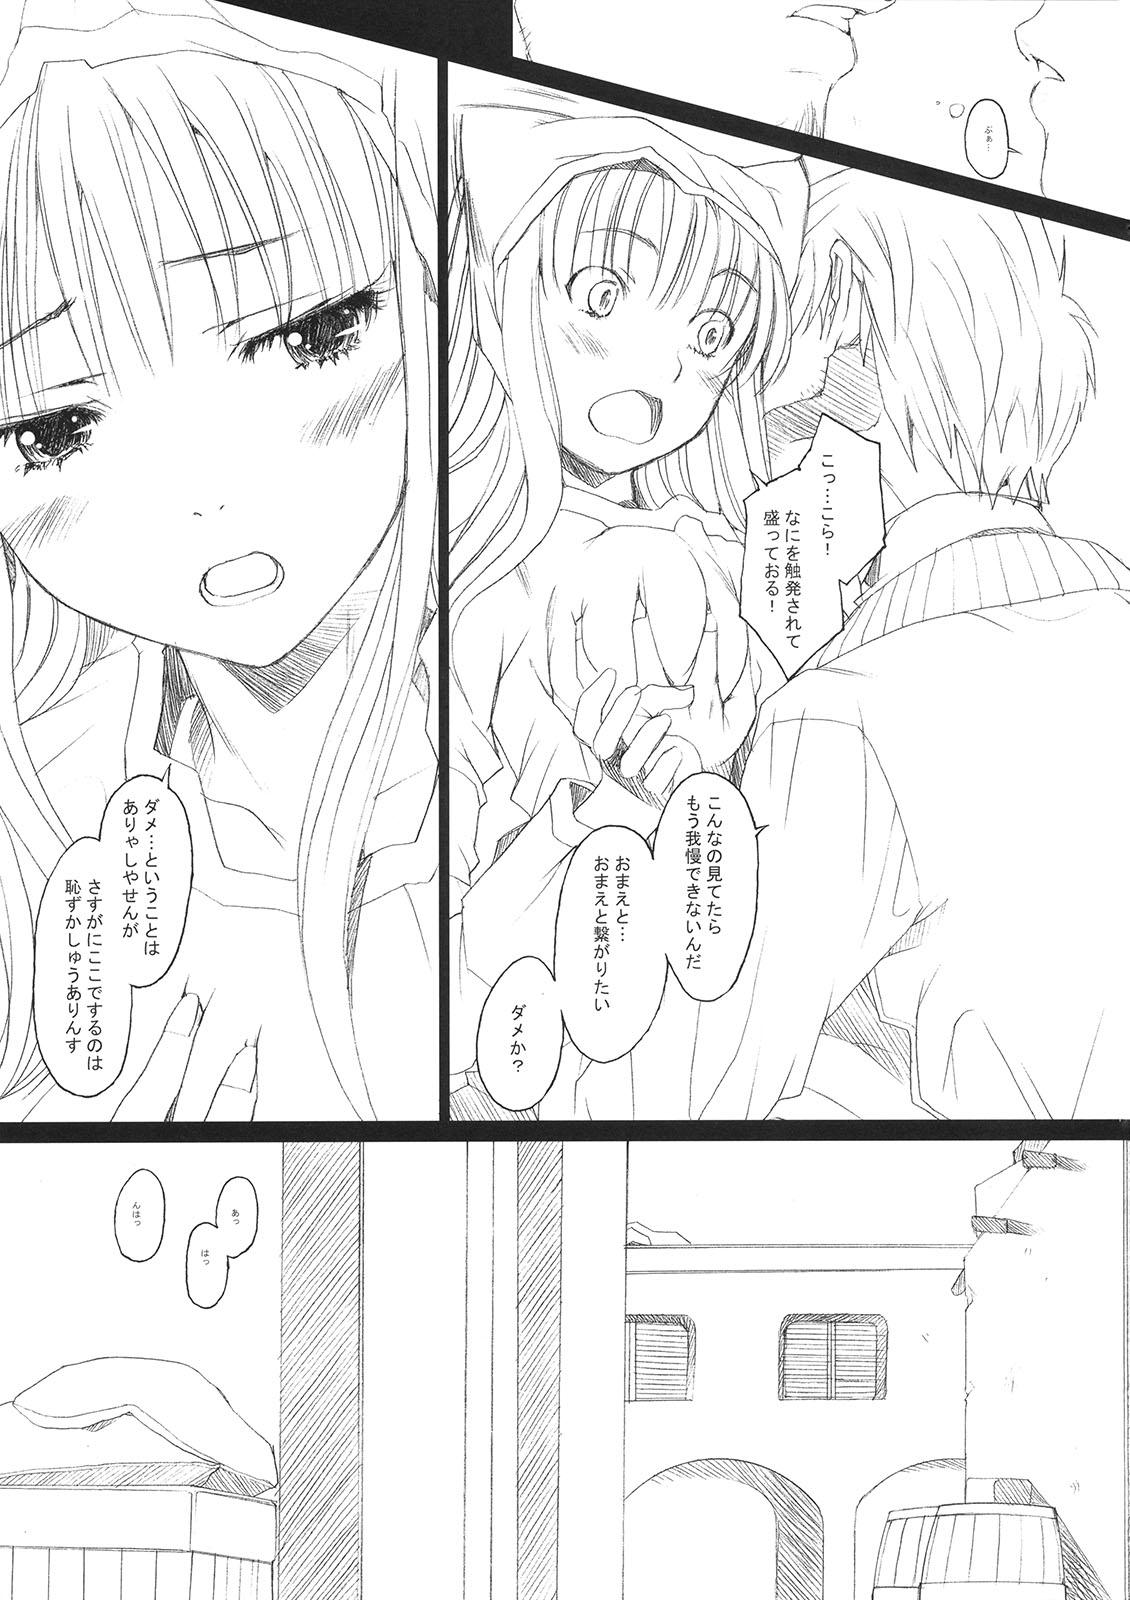 Male Ai ga Horohoro - Spice and wolf Stepdaughter - Page 6